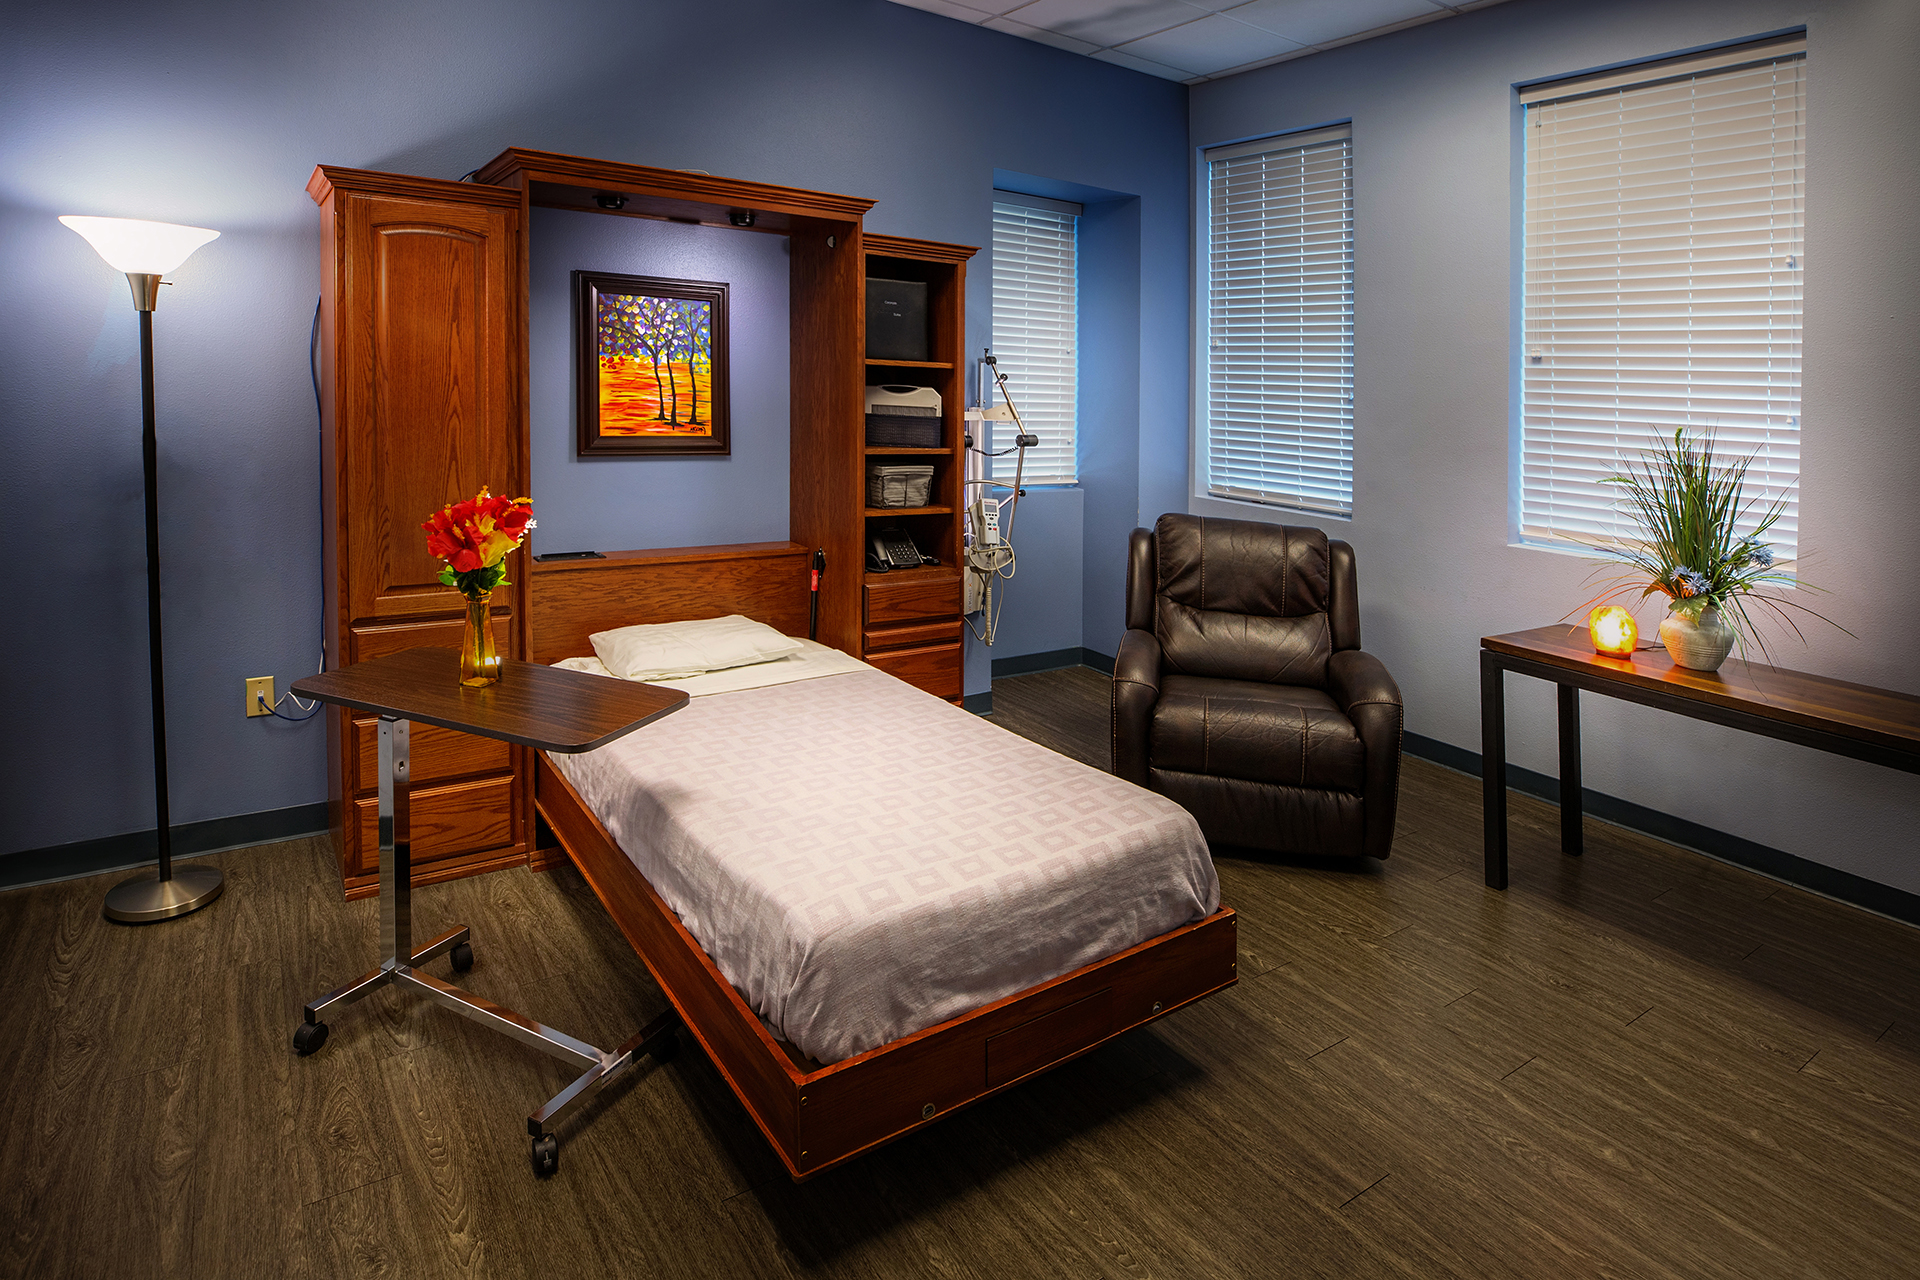 Recovery room for after surgery care at Crovetti orthopaedics